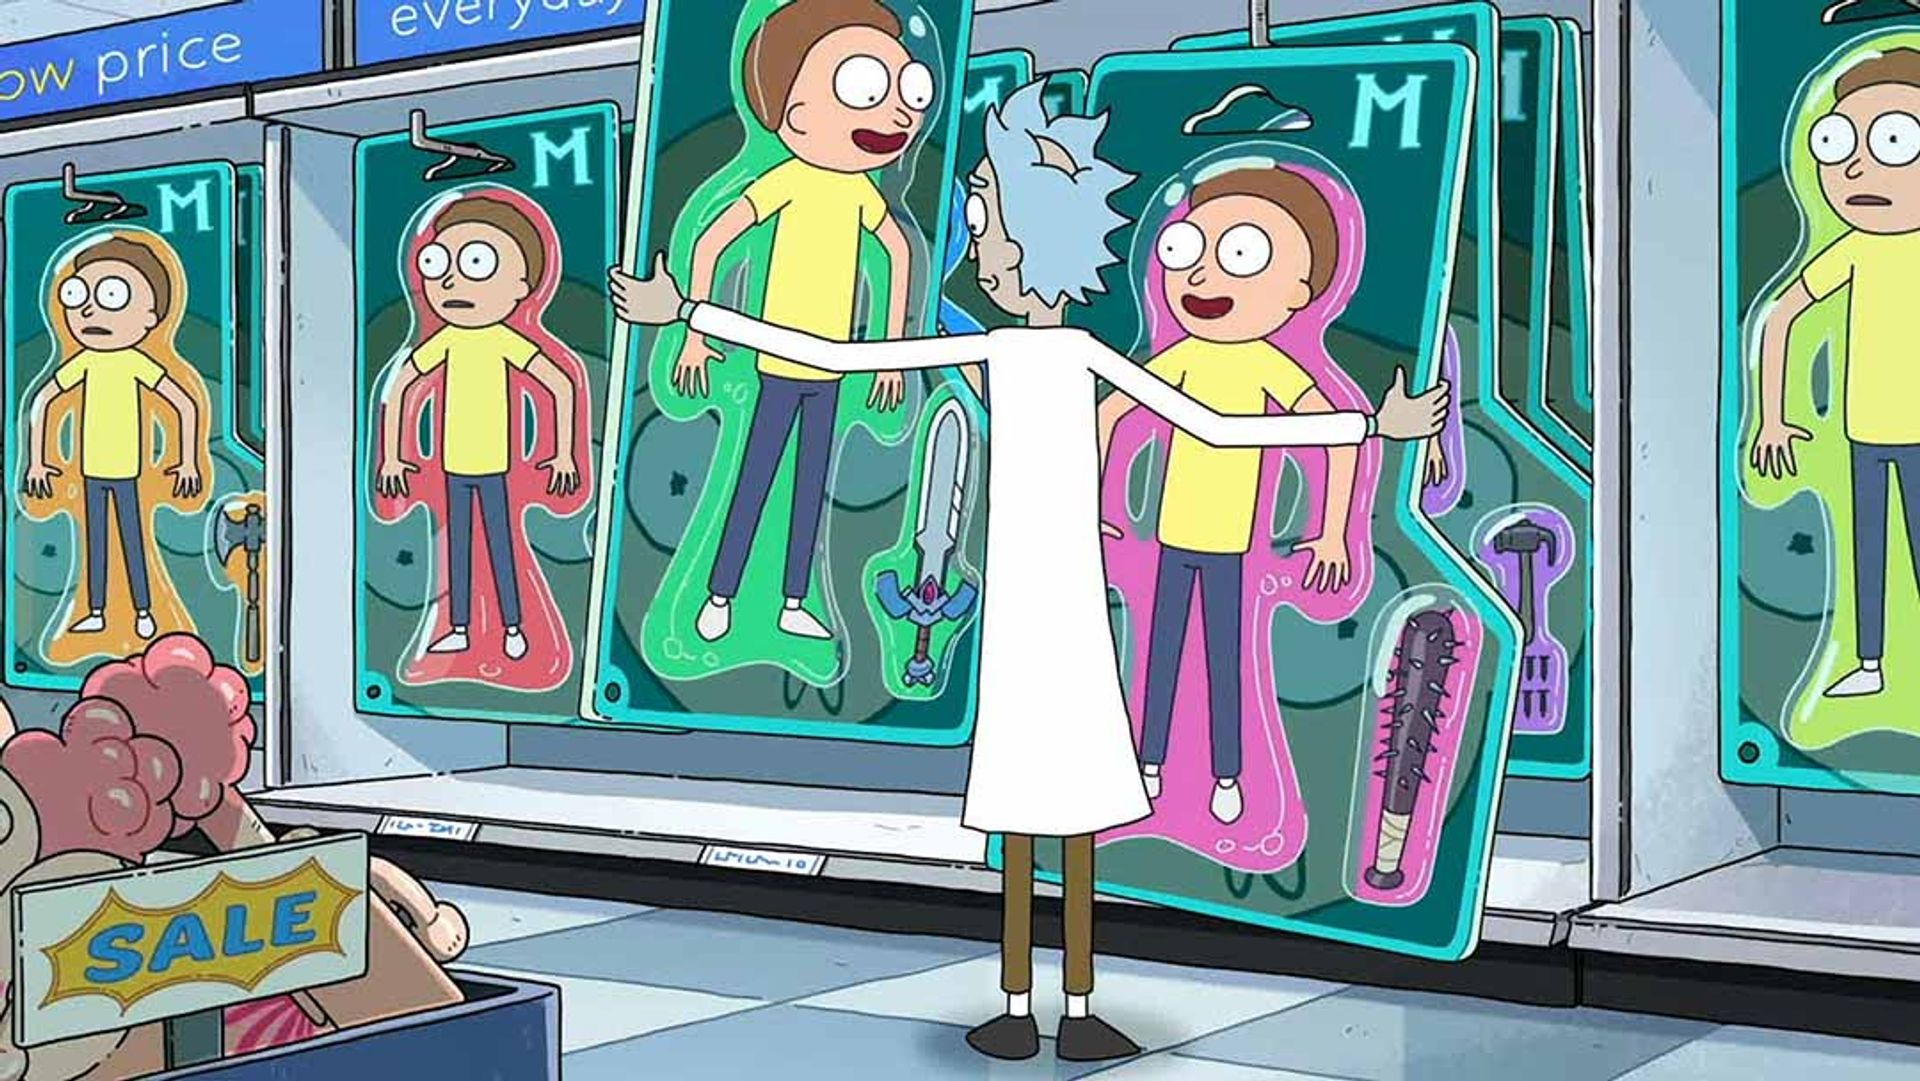 Rick and Morty Season 4 Episode 6 Plot and Cast Details